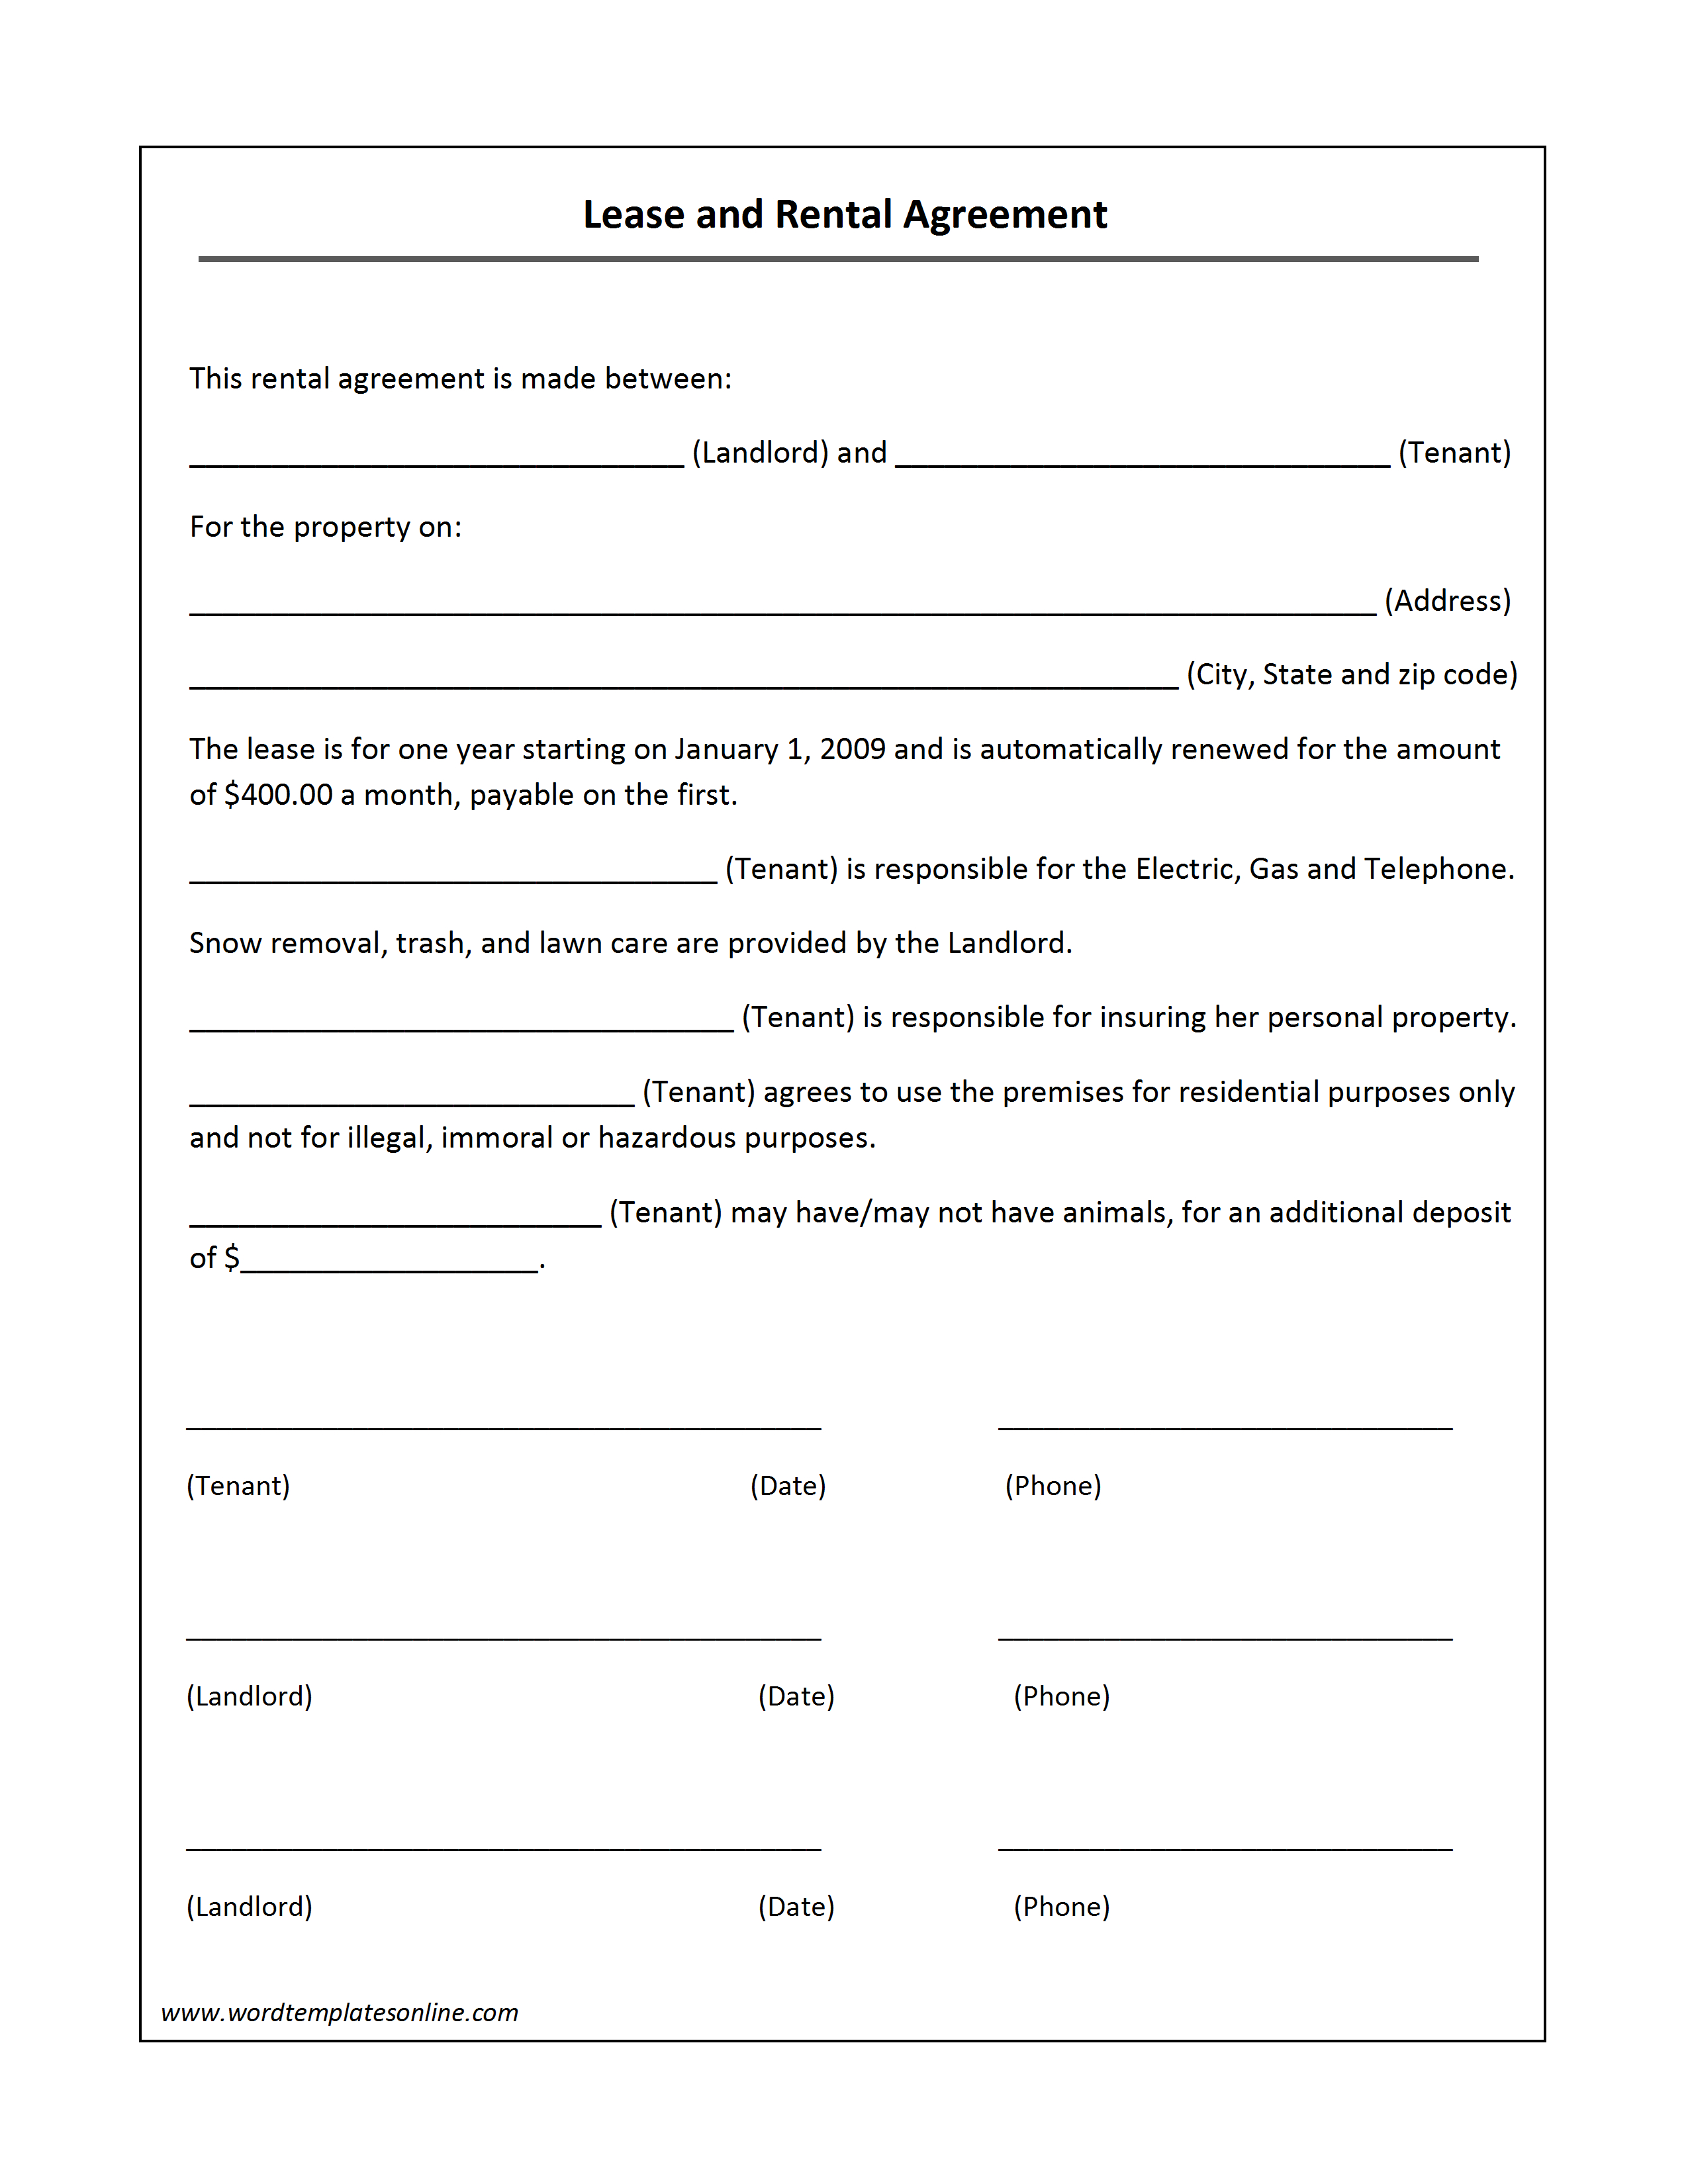 Lease Agreement Template - Free Printable Lease Agreement Texas